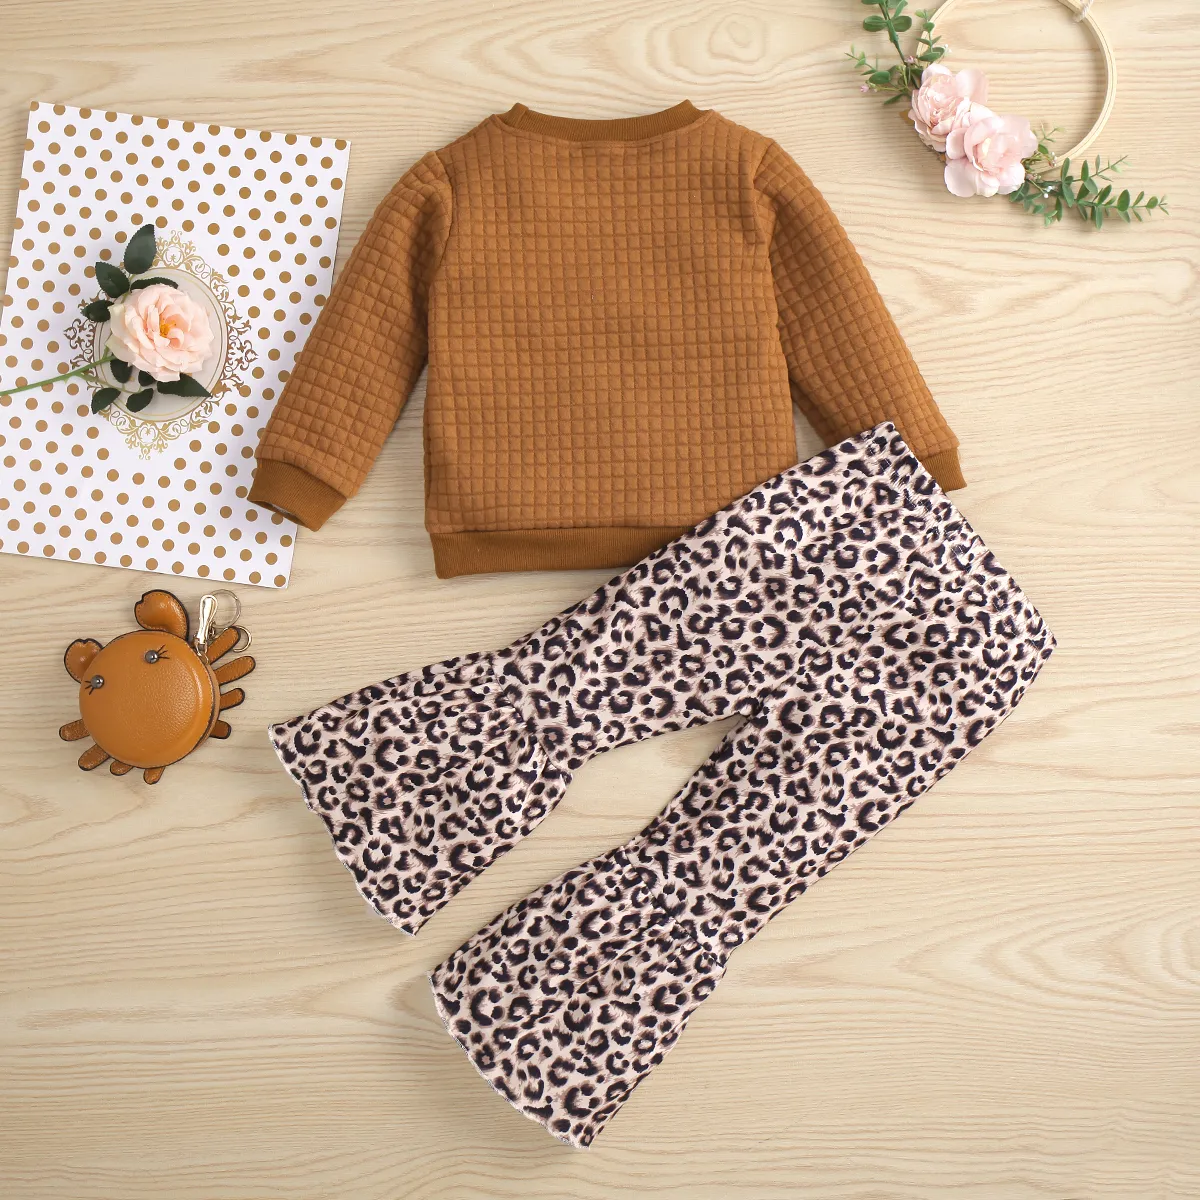 2-piece Toddler Girl Heart Leopard Print Textured Pullover and Flared Pants Set Brown big image 1